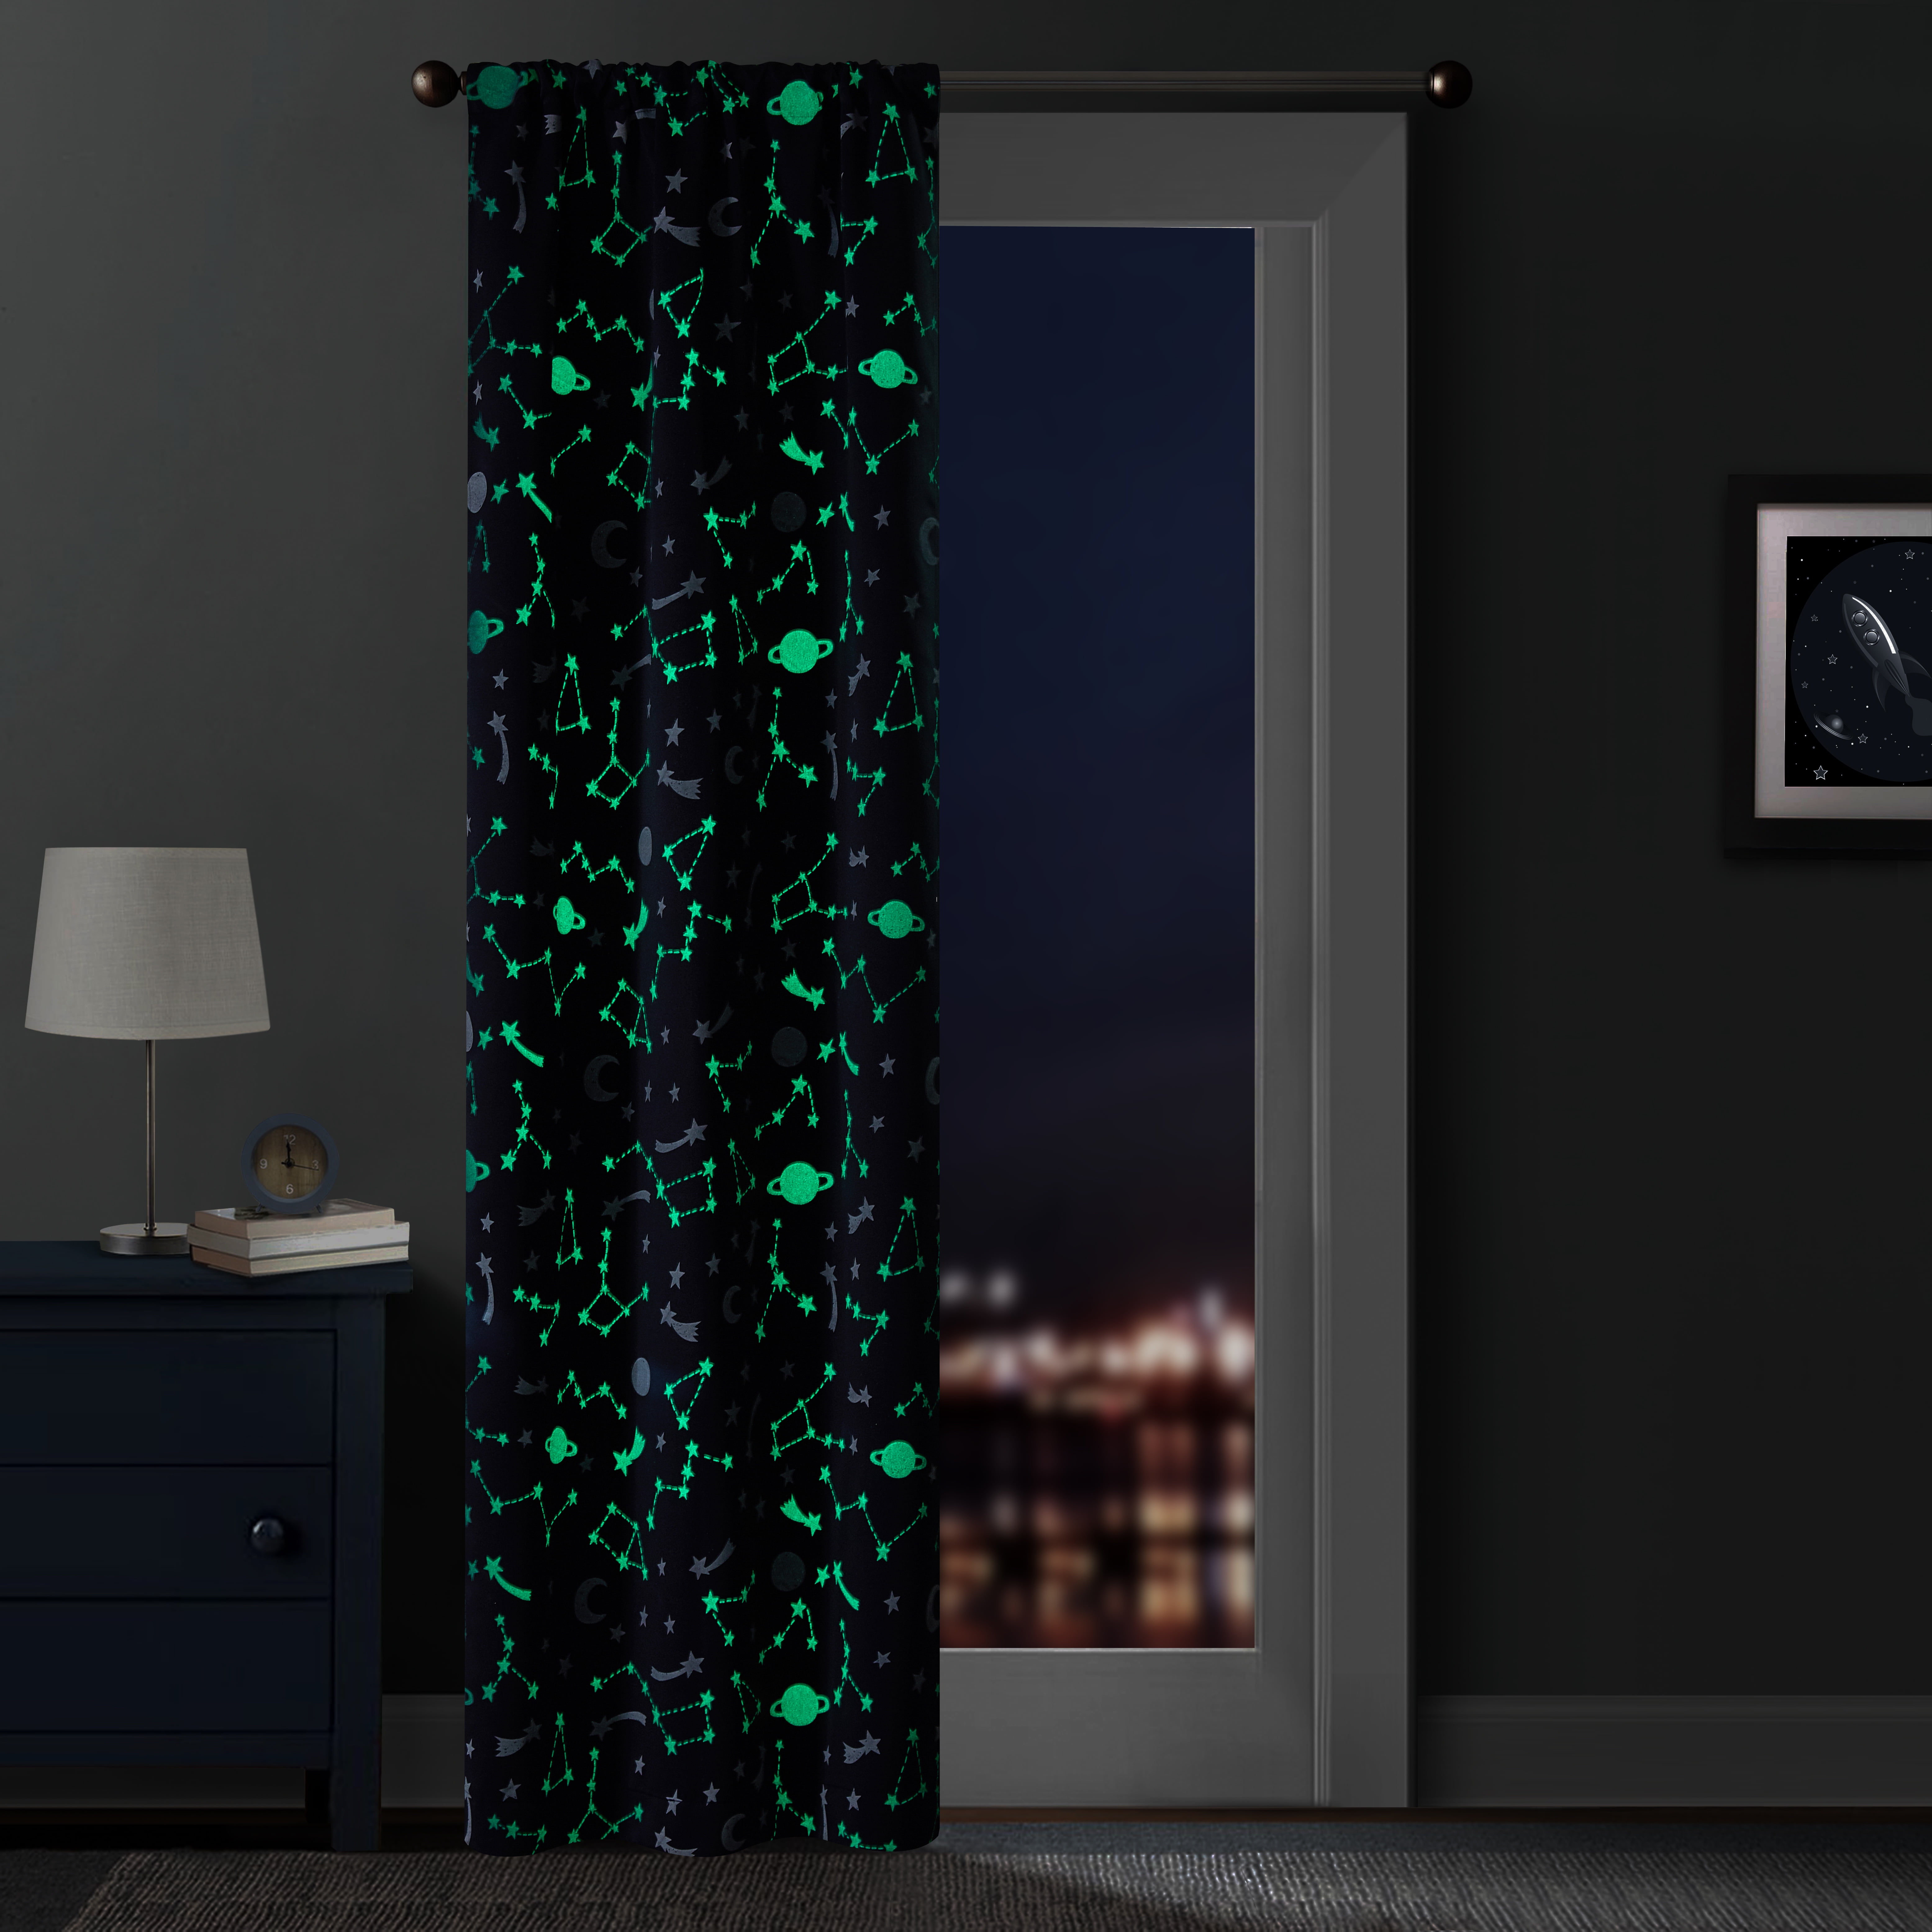 Details about   50 Piece Glow in the Dark Numbers Wall Ceiling Decor 